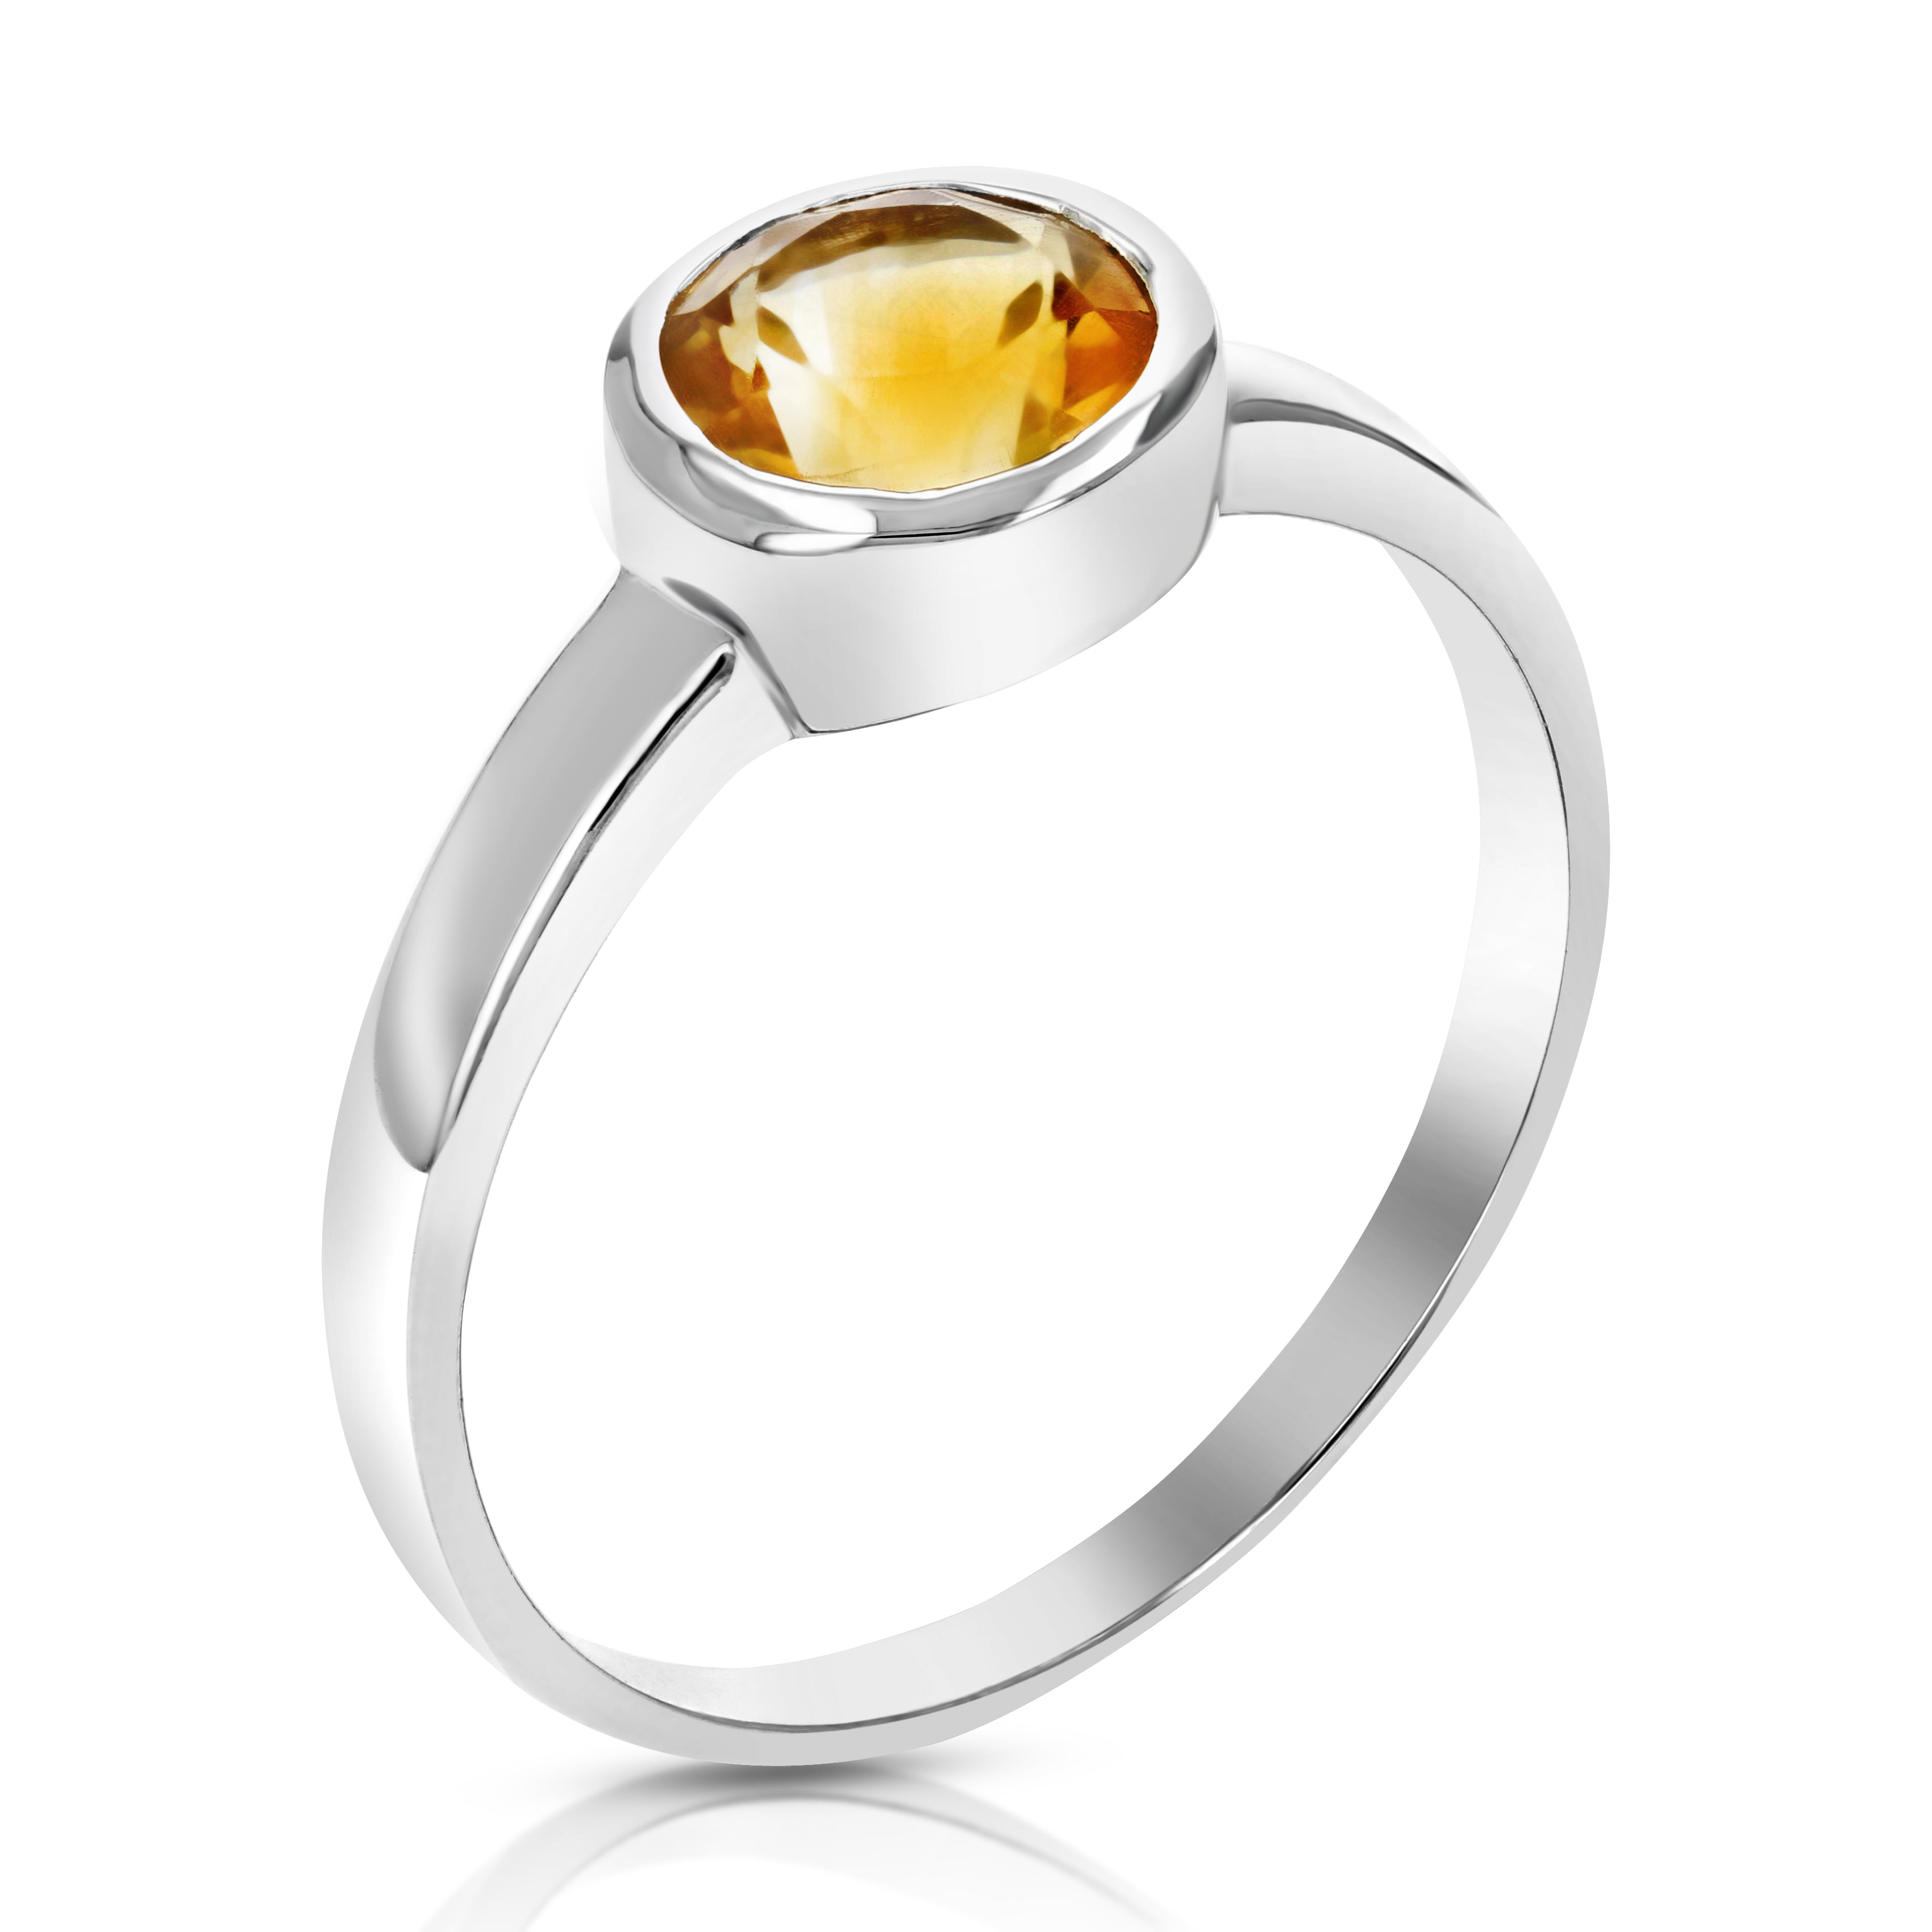 Solid Sterling Silver 925 Ctw Citrine Gemstone Solitaire Women Wedding Ring 